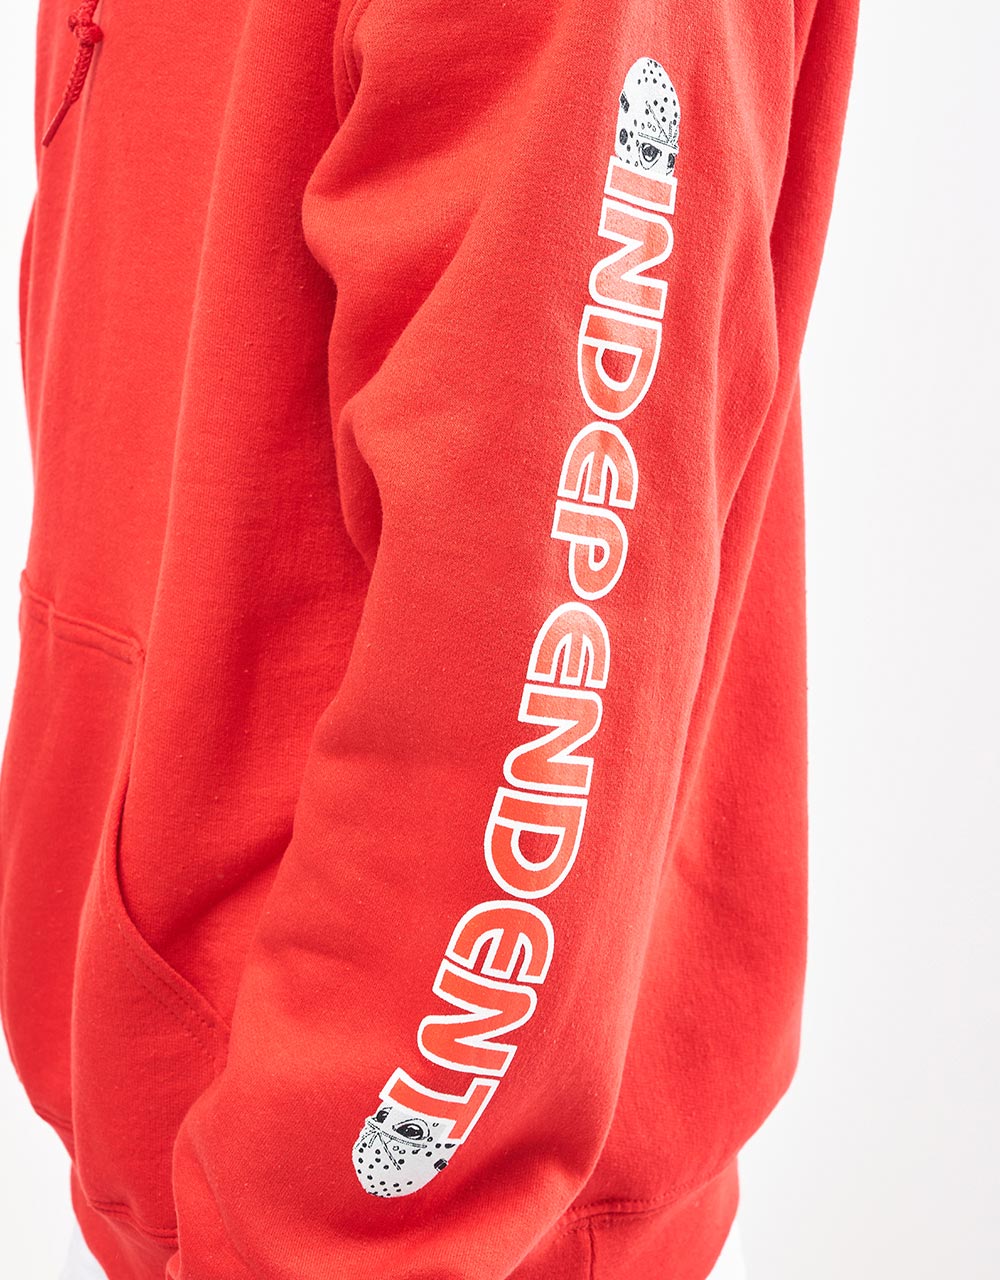 Hockey x Independent Half Mask Indy Pullover Hoodie - Red